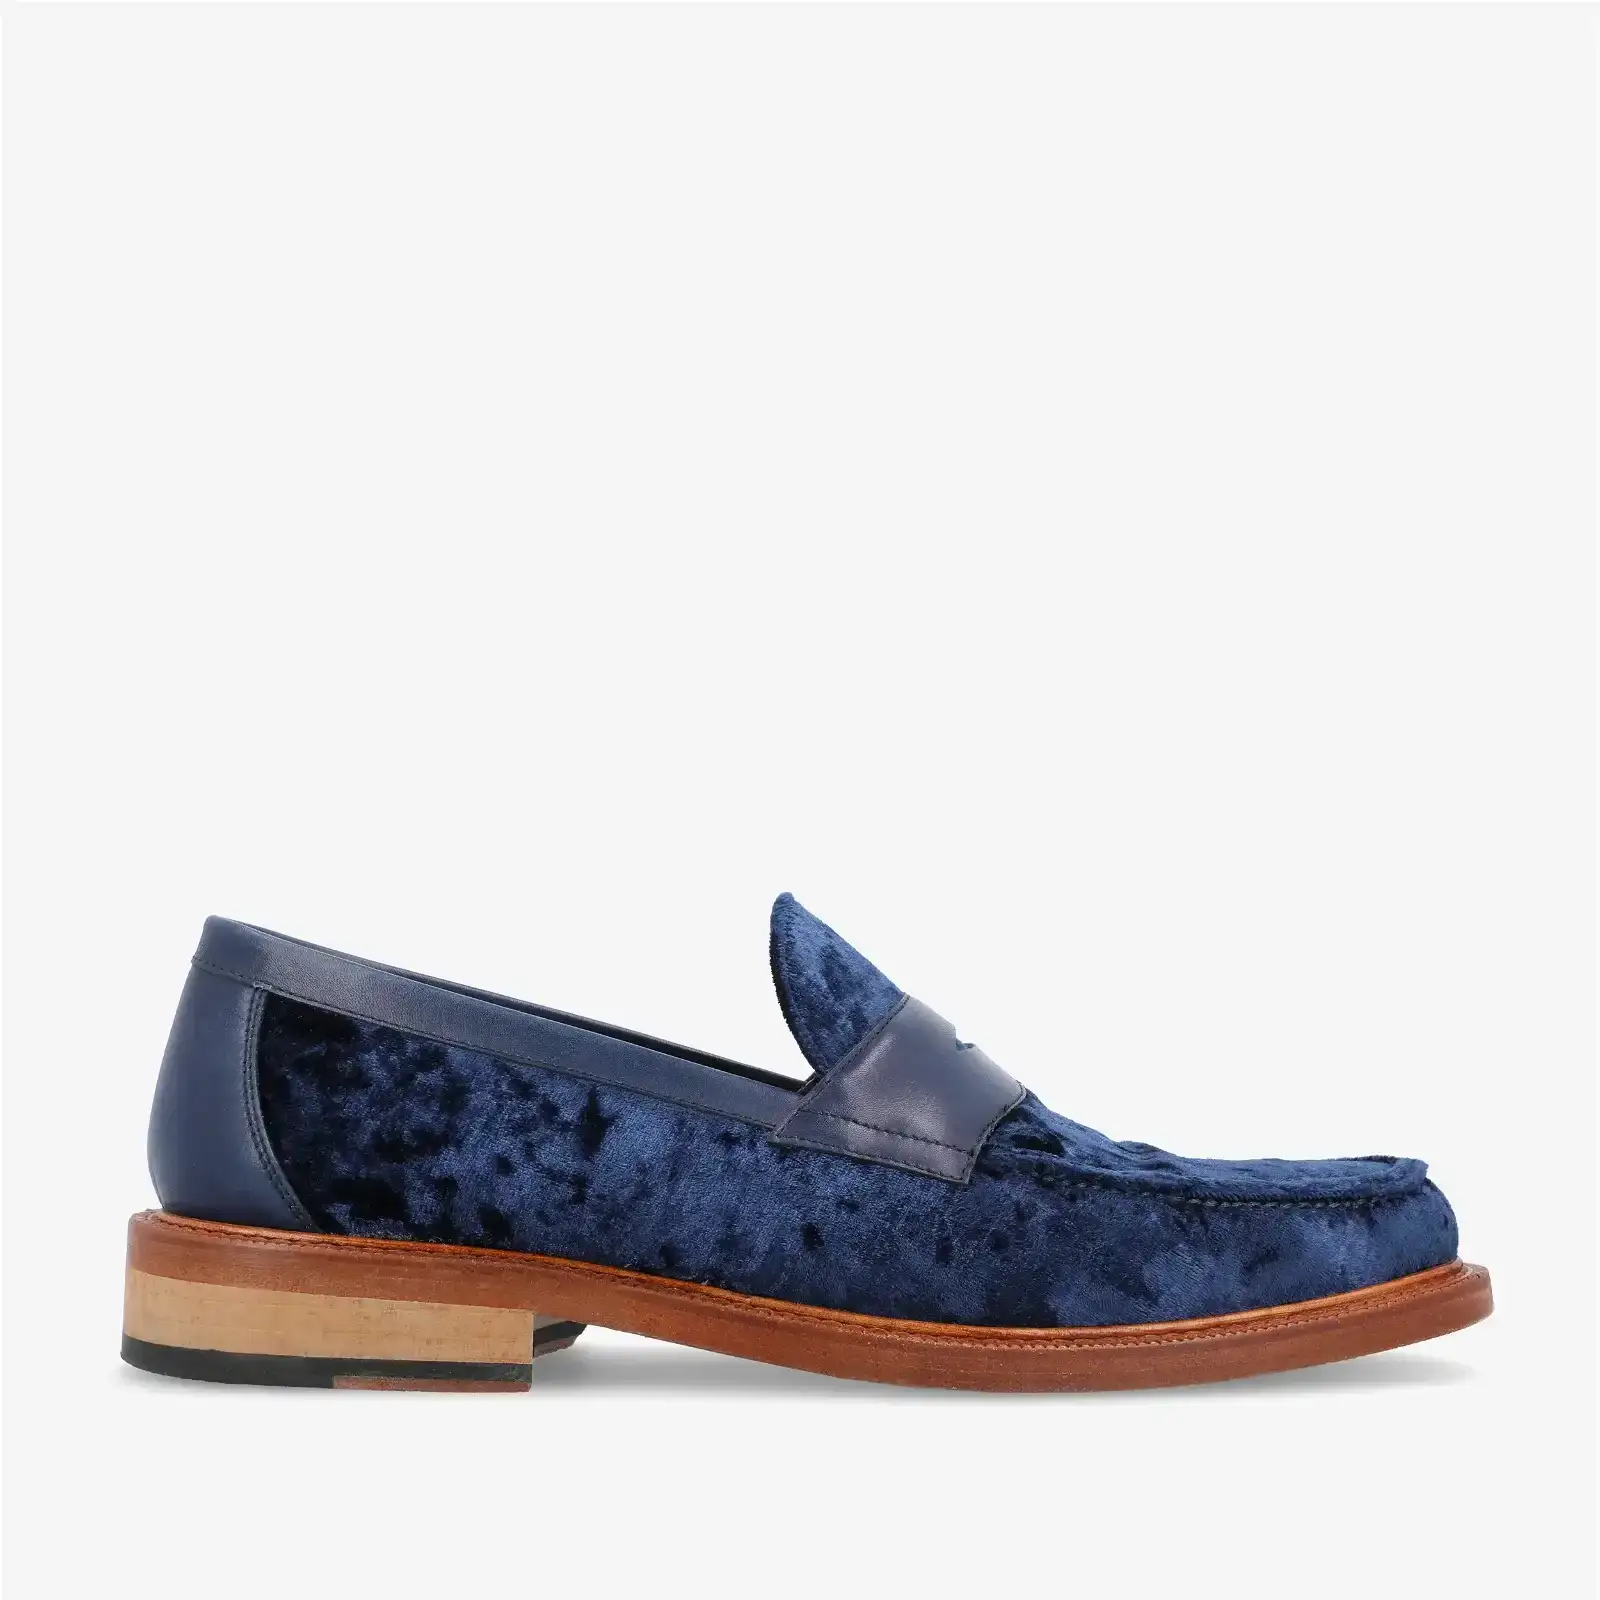 Image of The Fitz Loafer in Deep Azure